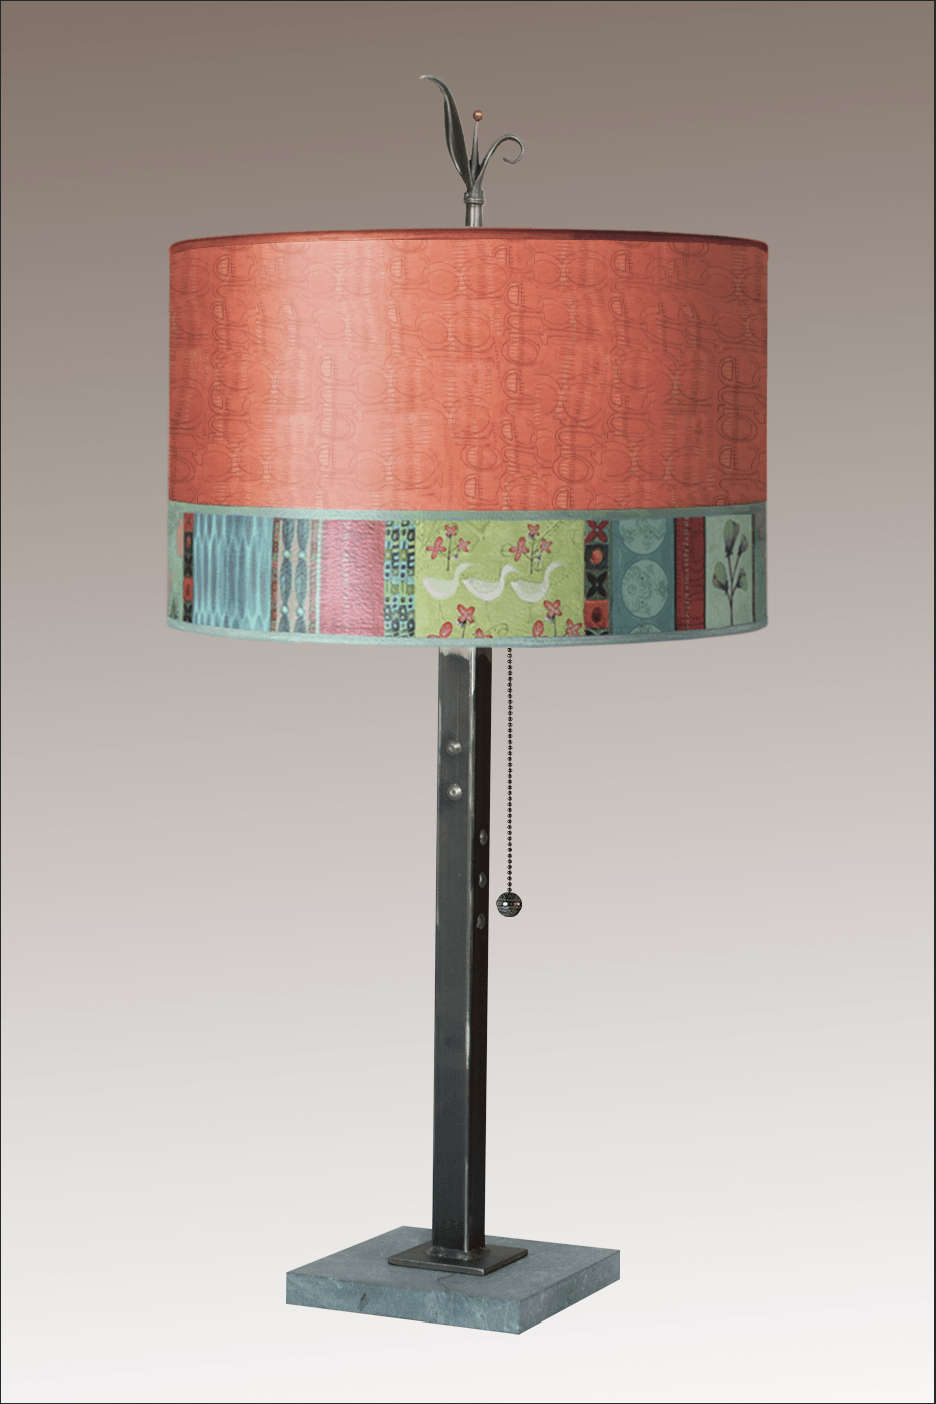 Janna Ugone & Co Table Lamps Steel Table Lamp with Large Drum Shade in Melody in Coral